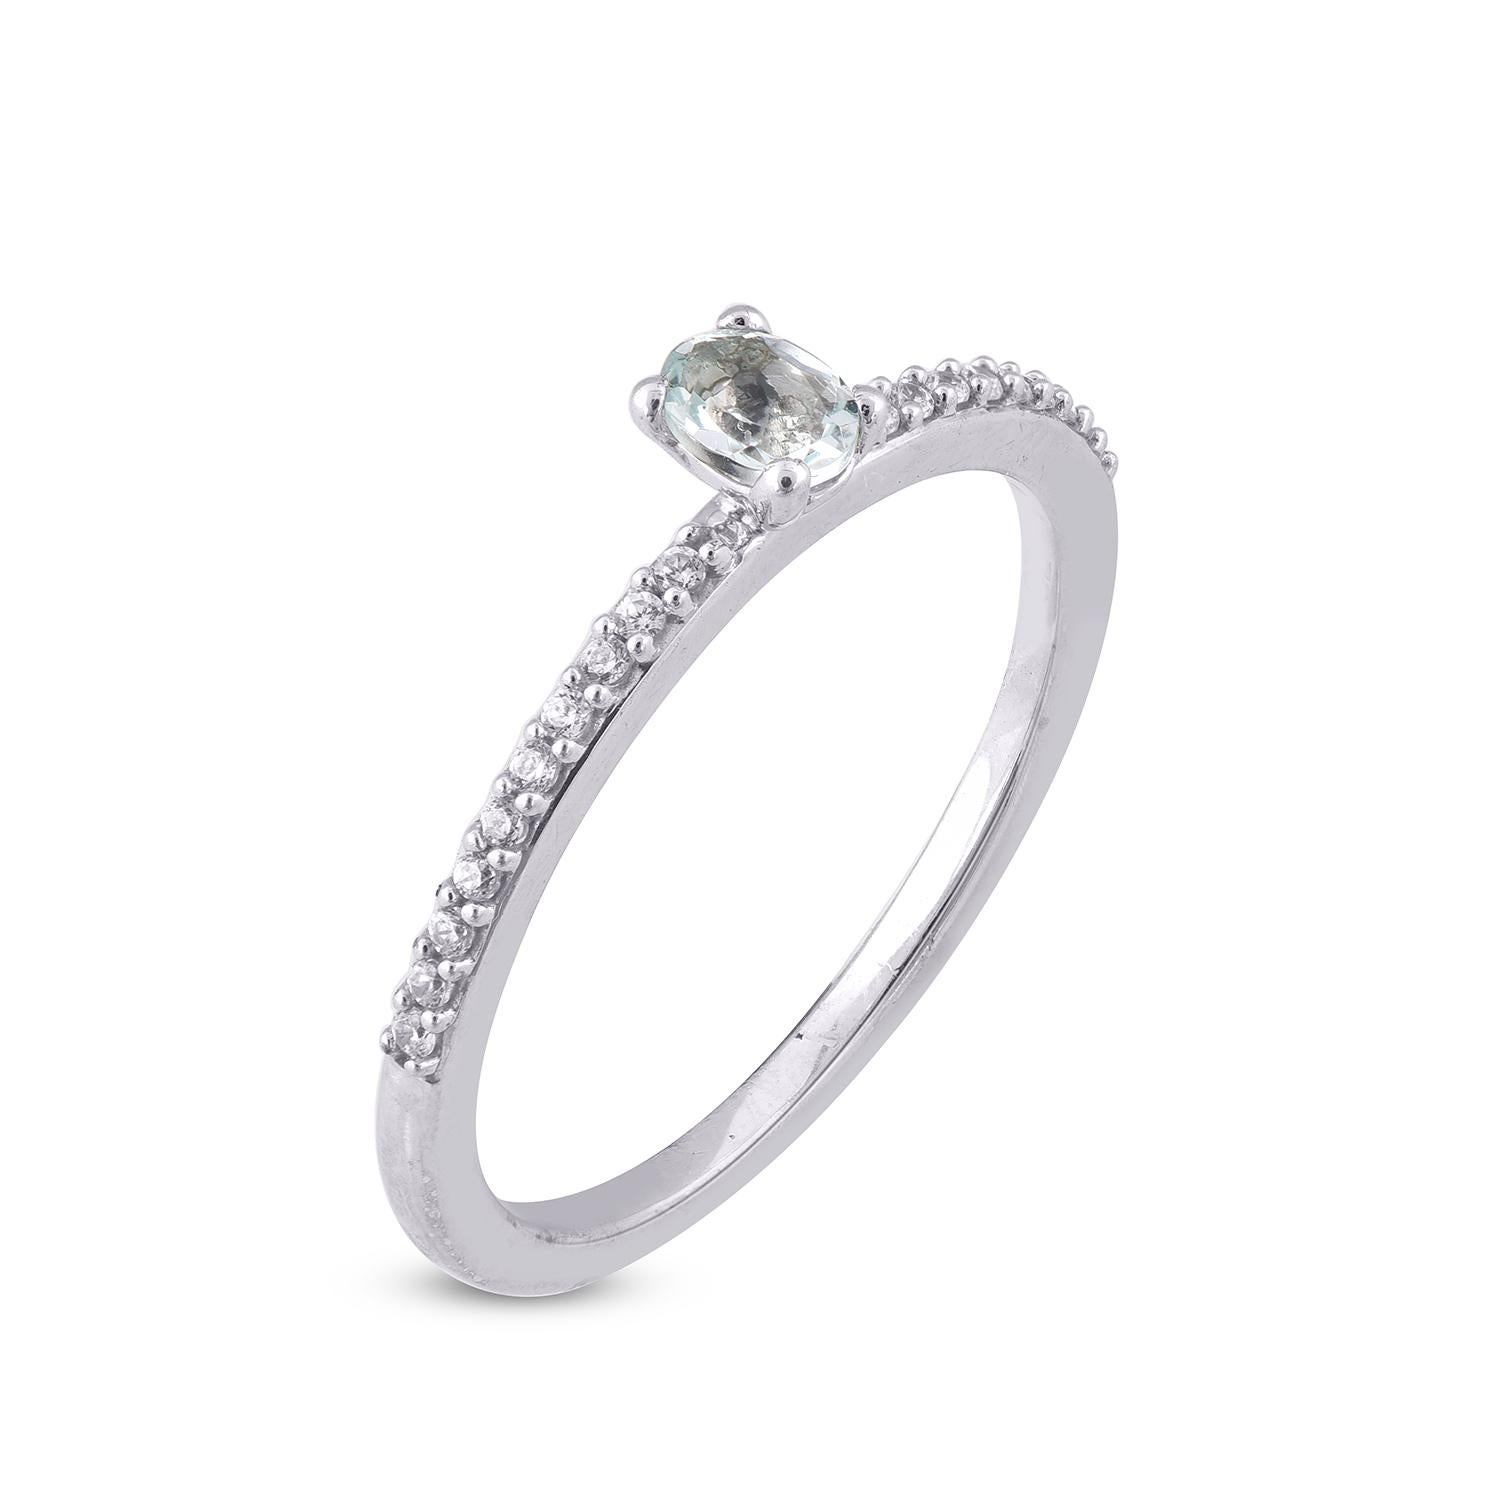 A classic look that compliments any attire, these Oval cut Aquamarine gemstone with white diamond ring are a stunning addition to your jewelry box. Studded with 20 round diamond set in Prong setting, shimmers in H-I color I2 clarity and crafted in